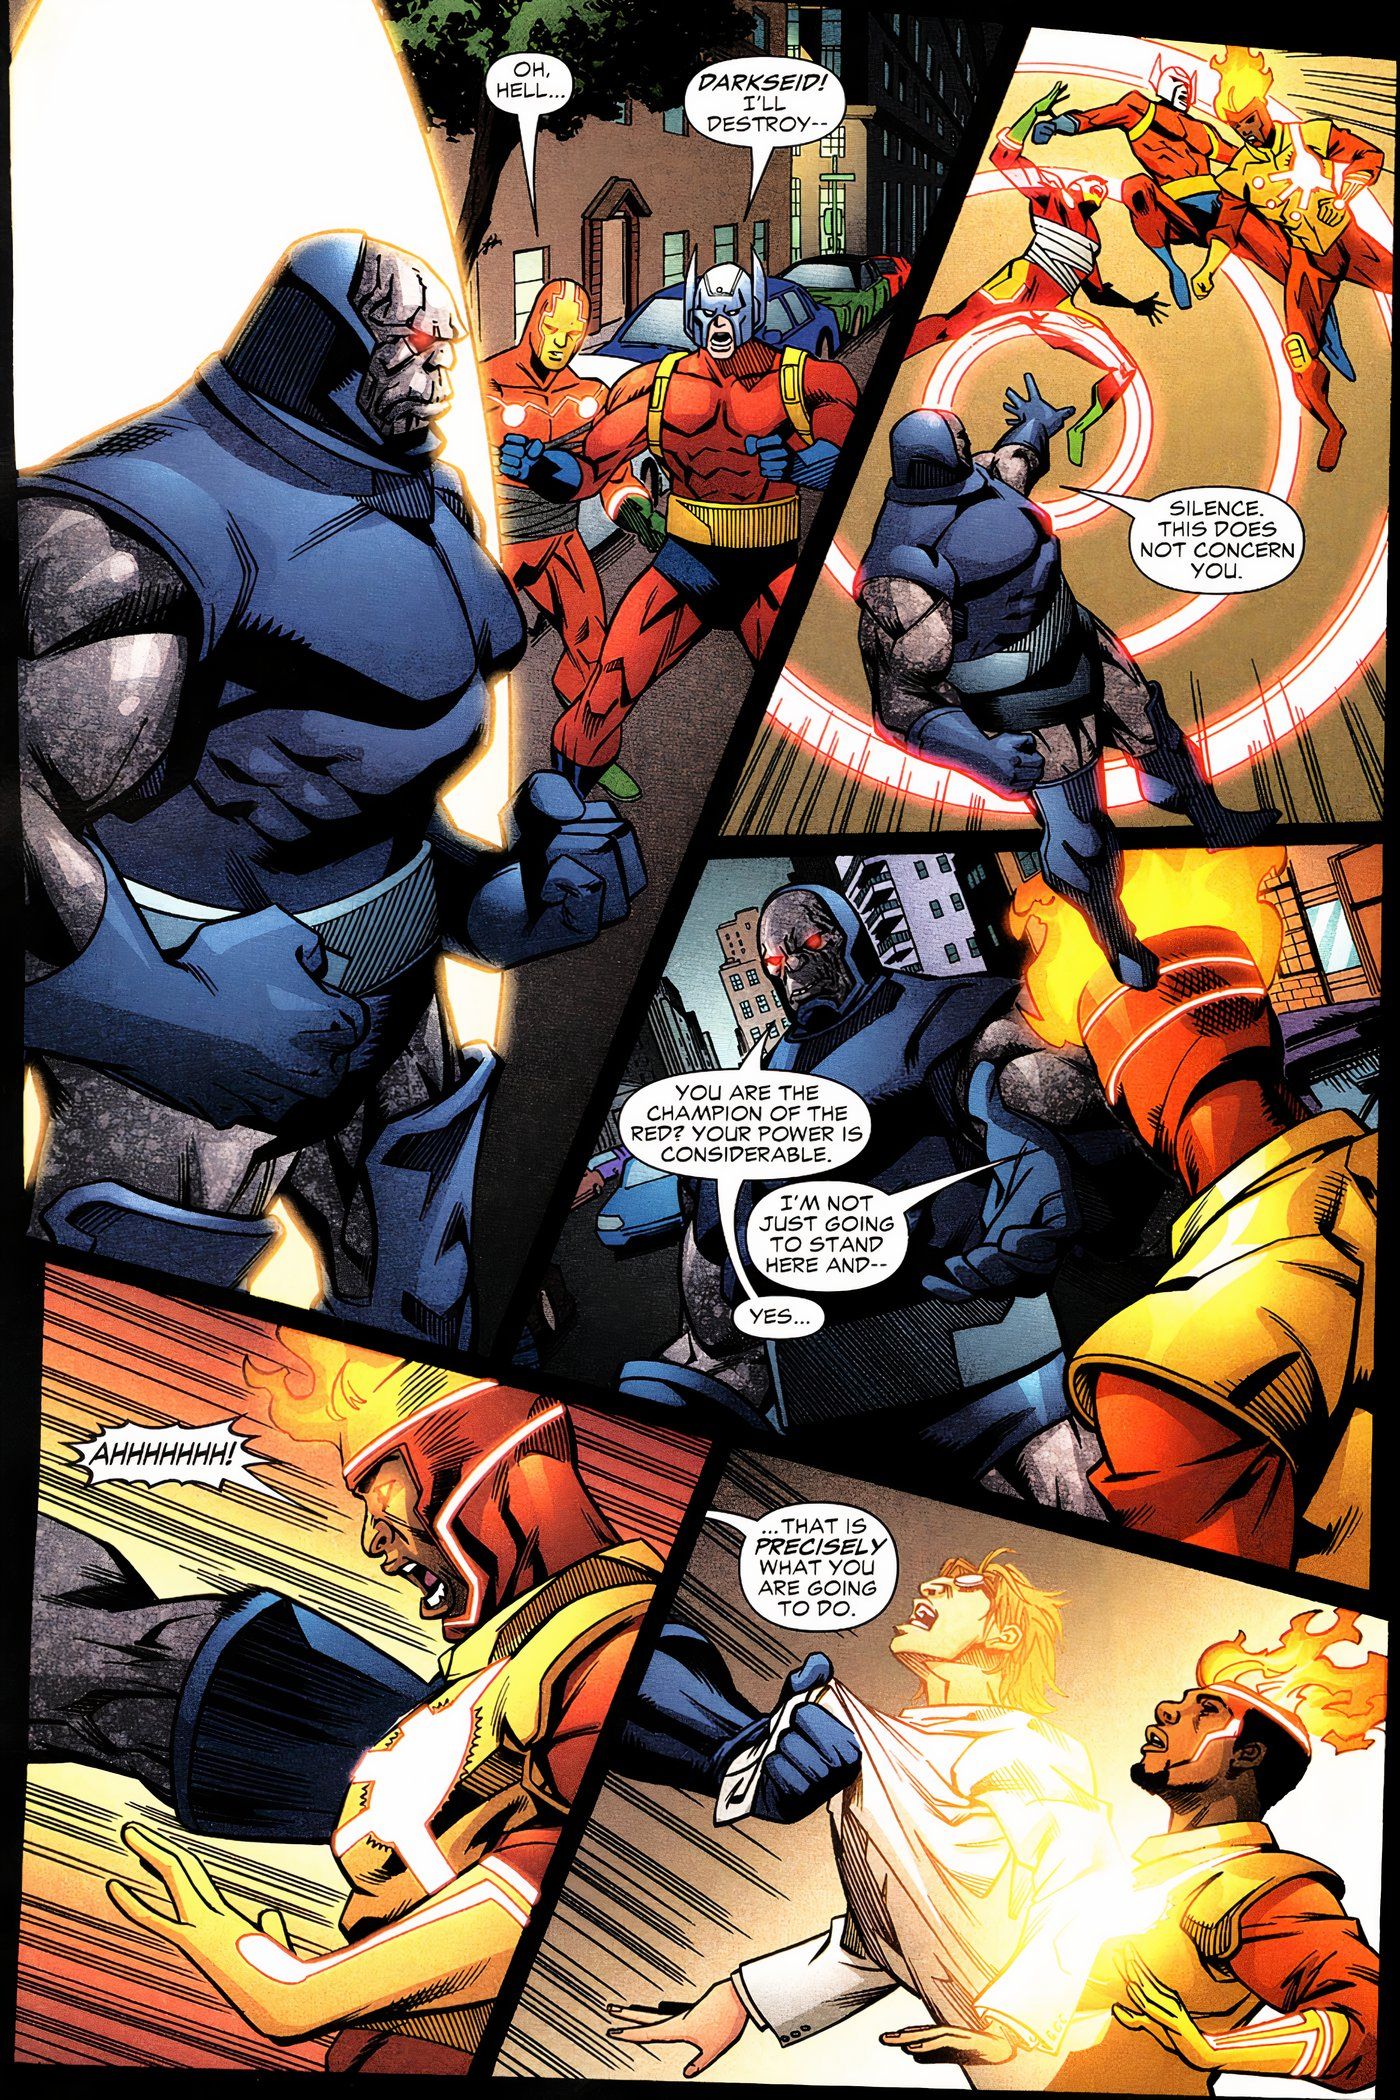 Darkseid rips out one of Firestorm's personas